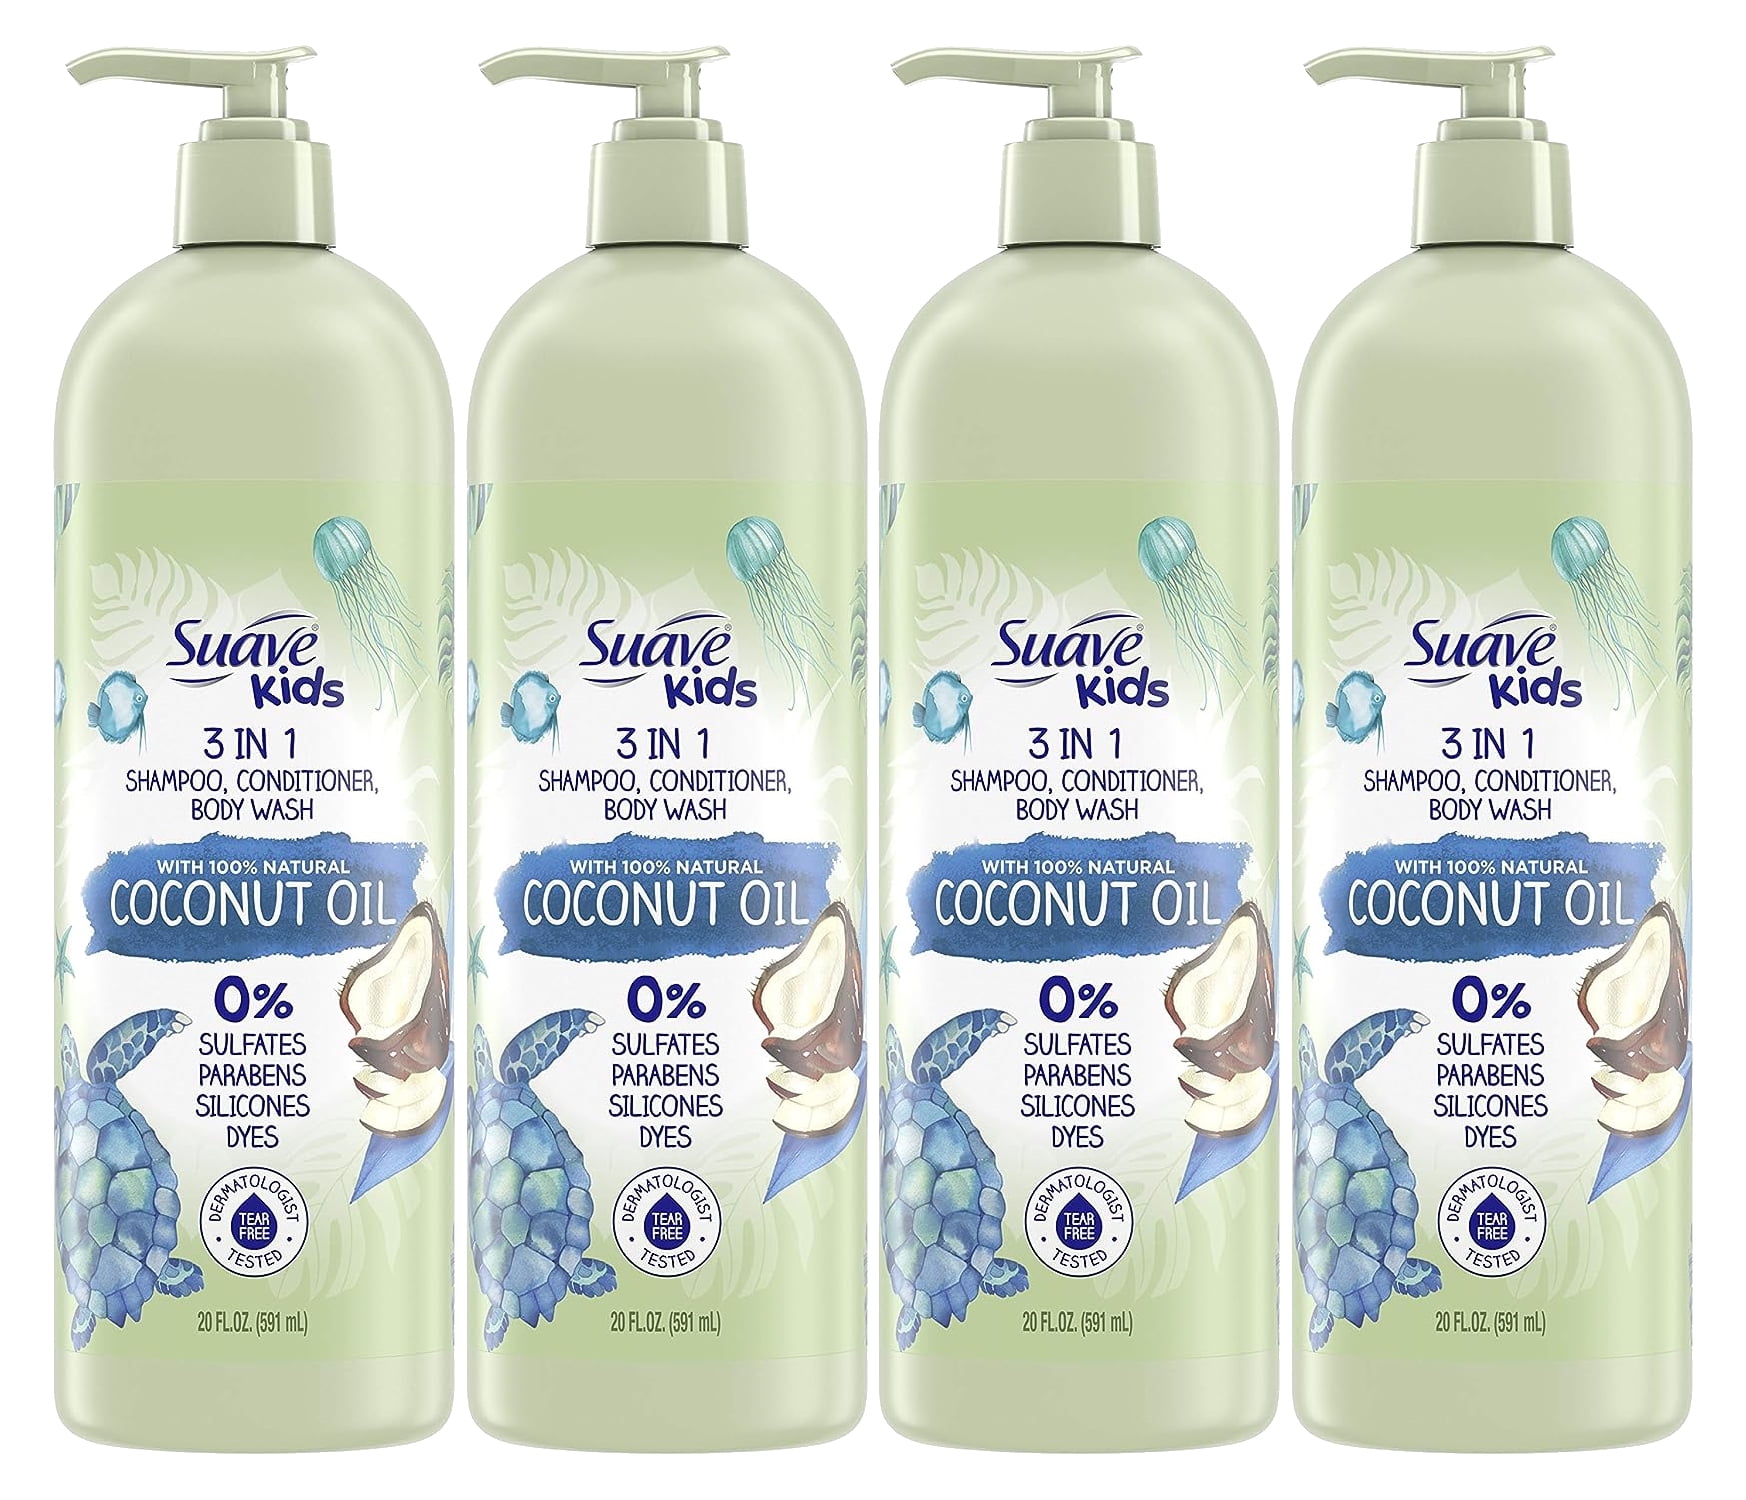 Natural Shampoo, Conditioner and Body Wash Bars made in USA – SHOWER CANDY